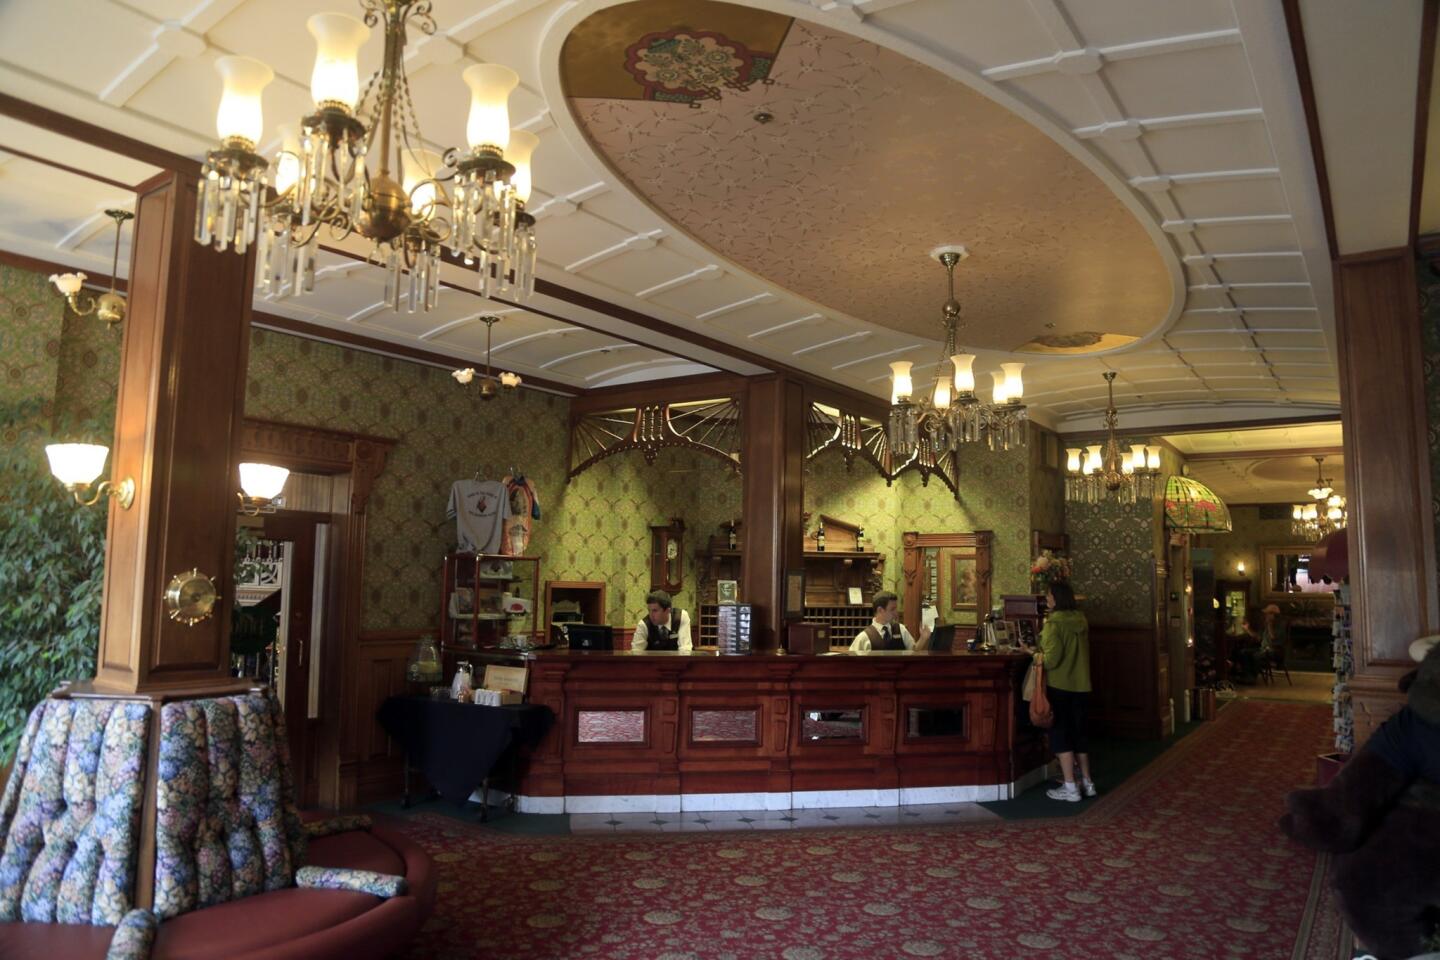 The Strater Hotel interior